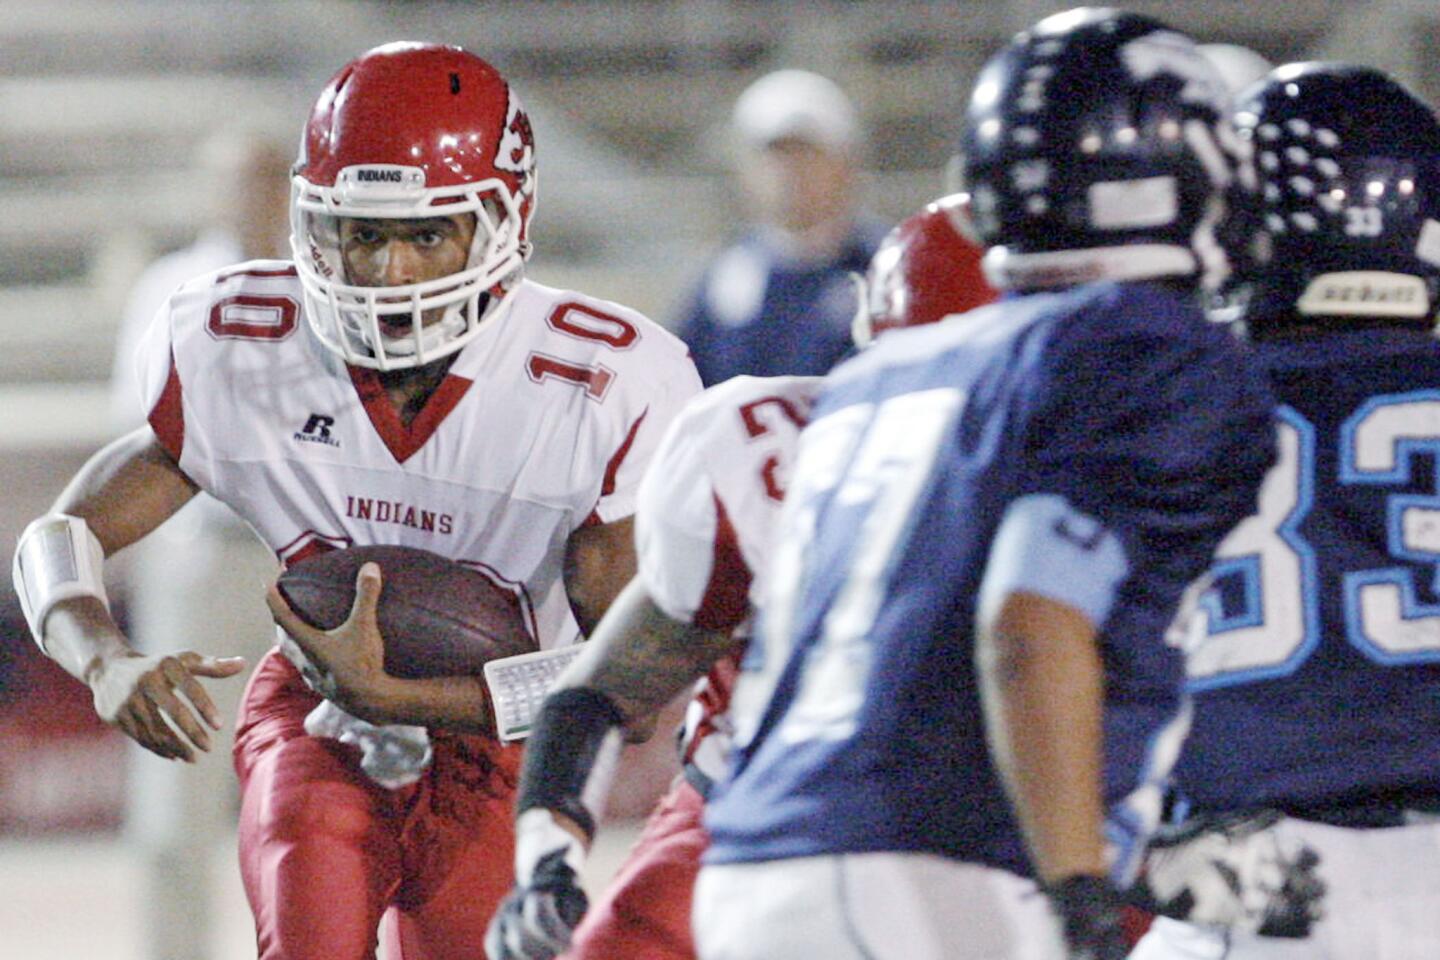 Burroughs' quarterback Andrew Williams runs with the ball during a game against CV at Glendale High School on Thursday, October 4, 2012.